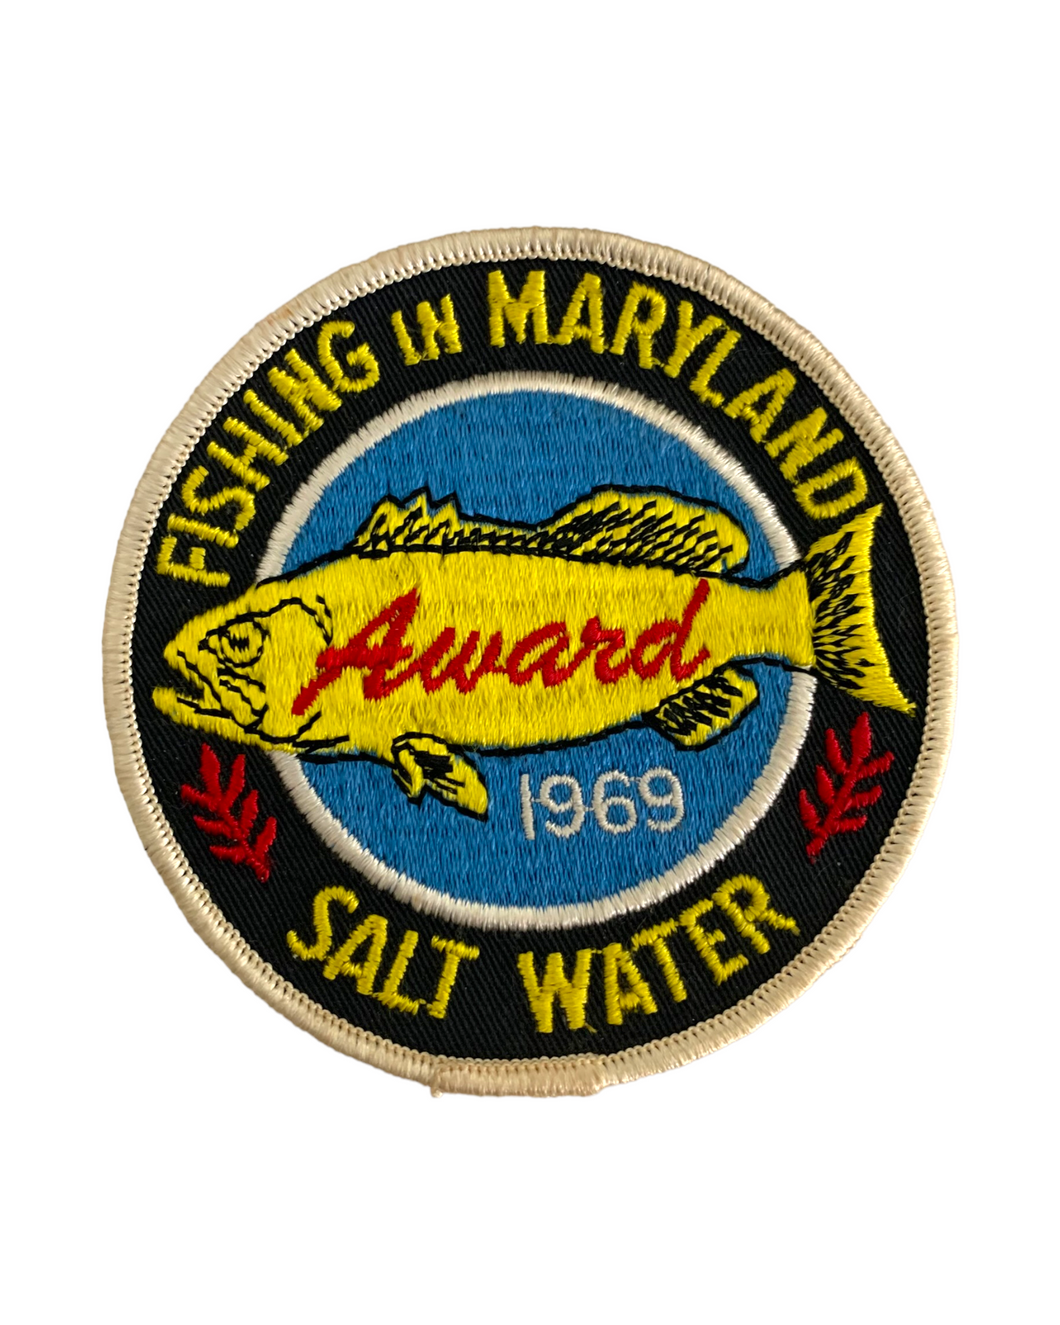 FISHING IN MARYLAND SALT WATER 1969 AWARD PATCH Embroidered in Black, White, Yellow, Red, & Sky Blue